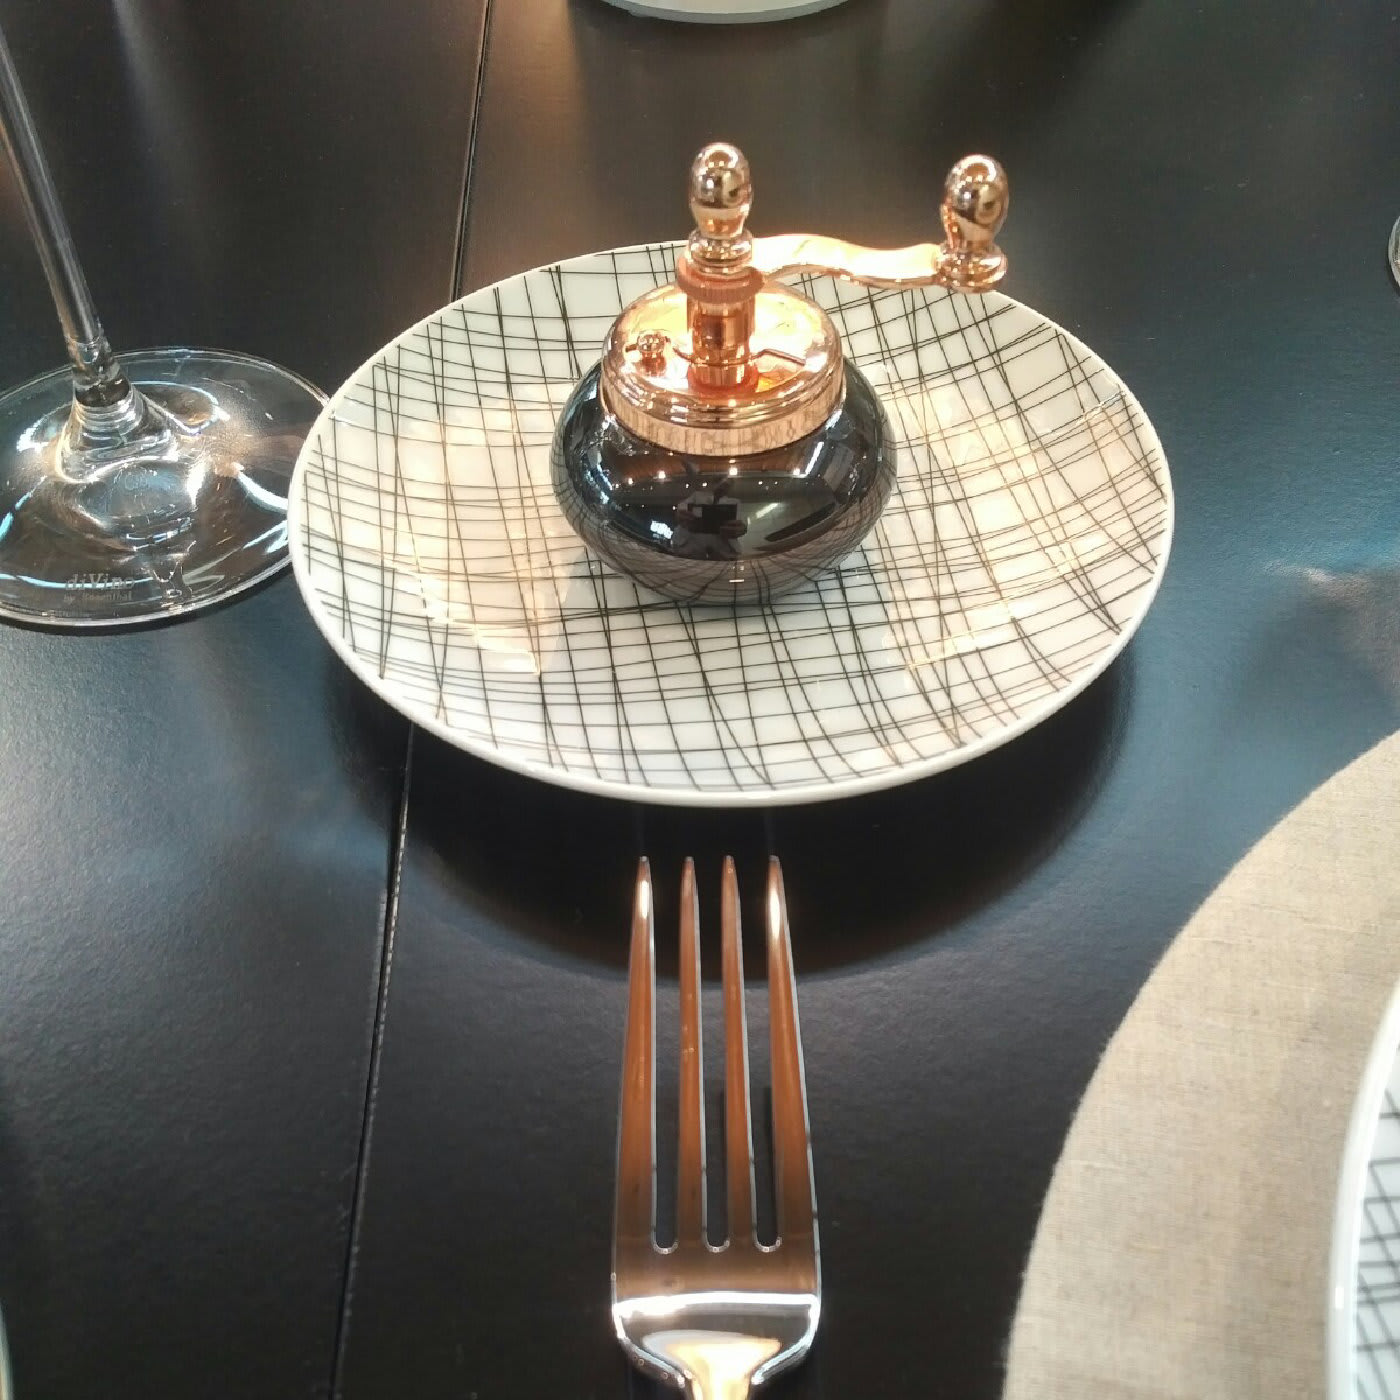 Black Nickel And Copper Plated Brass Pepper Mill And Salt Shaker - Chiarugi 1952